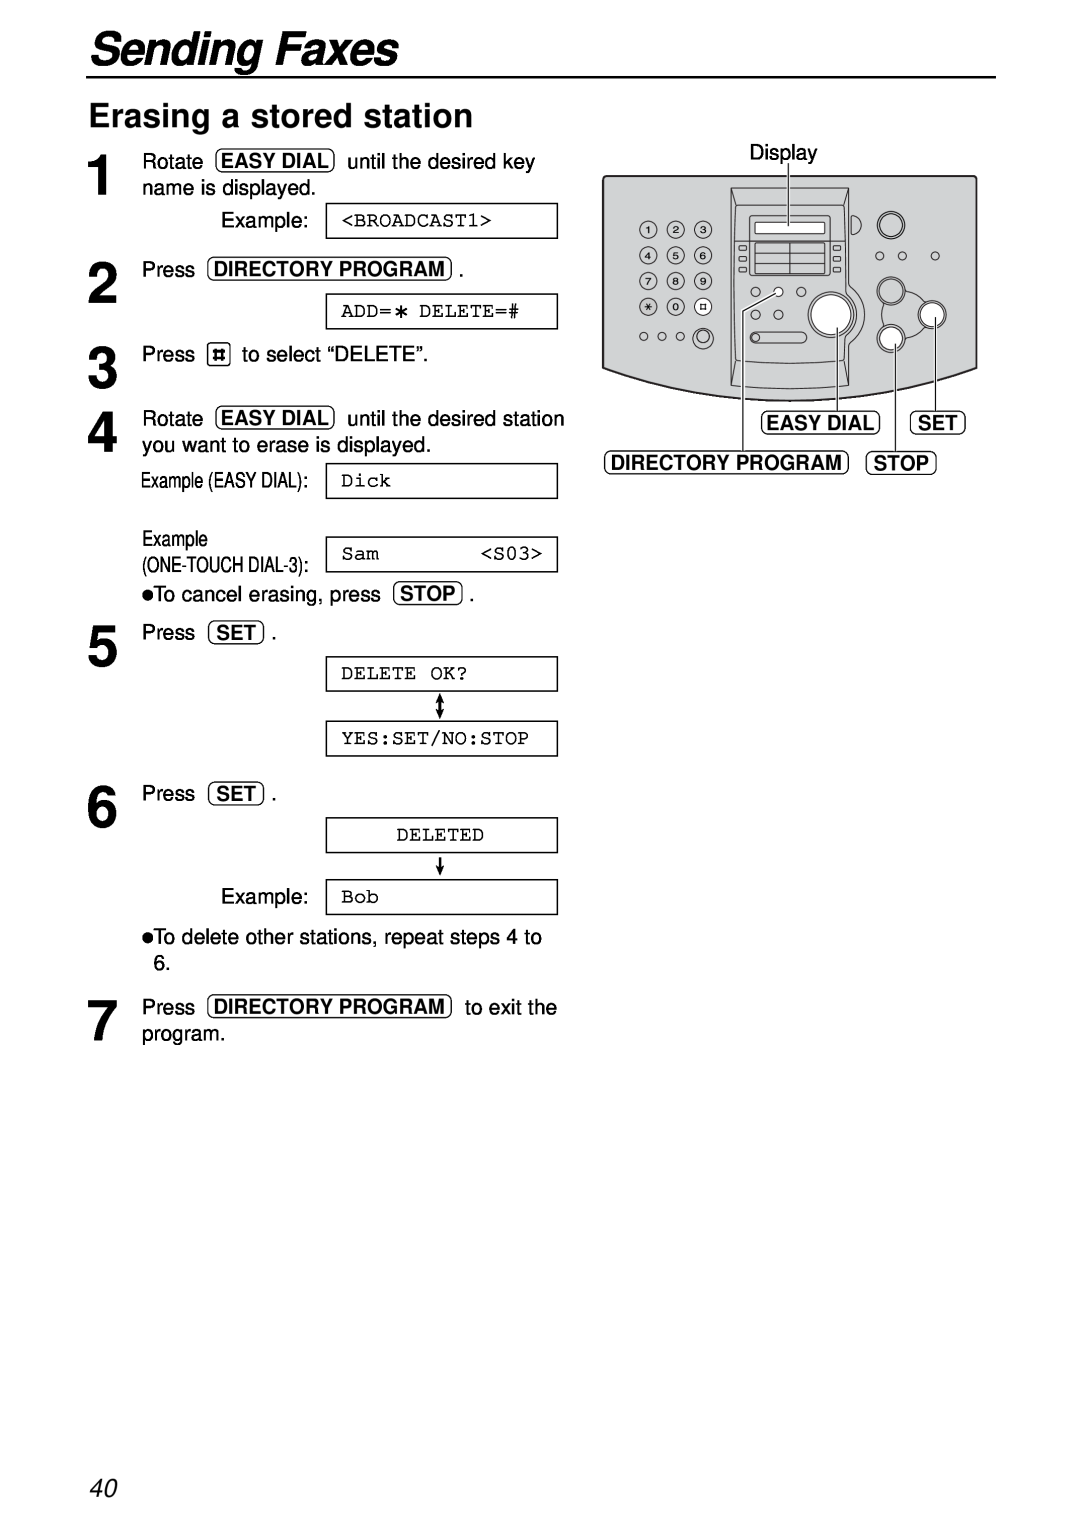 Panasonic KX-FL501AL manual Erasing a stored station, Sending Faxes, Press DIRECTORY PROGRAM, Example ONE-TOUCH DIAL-3 